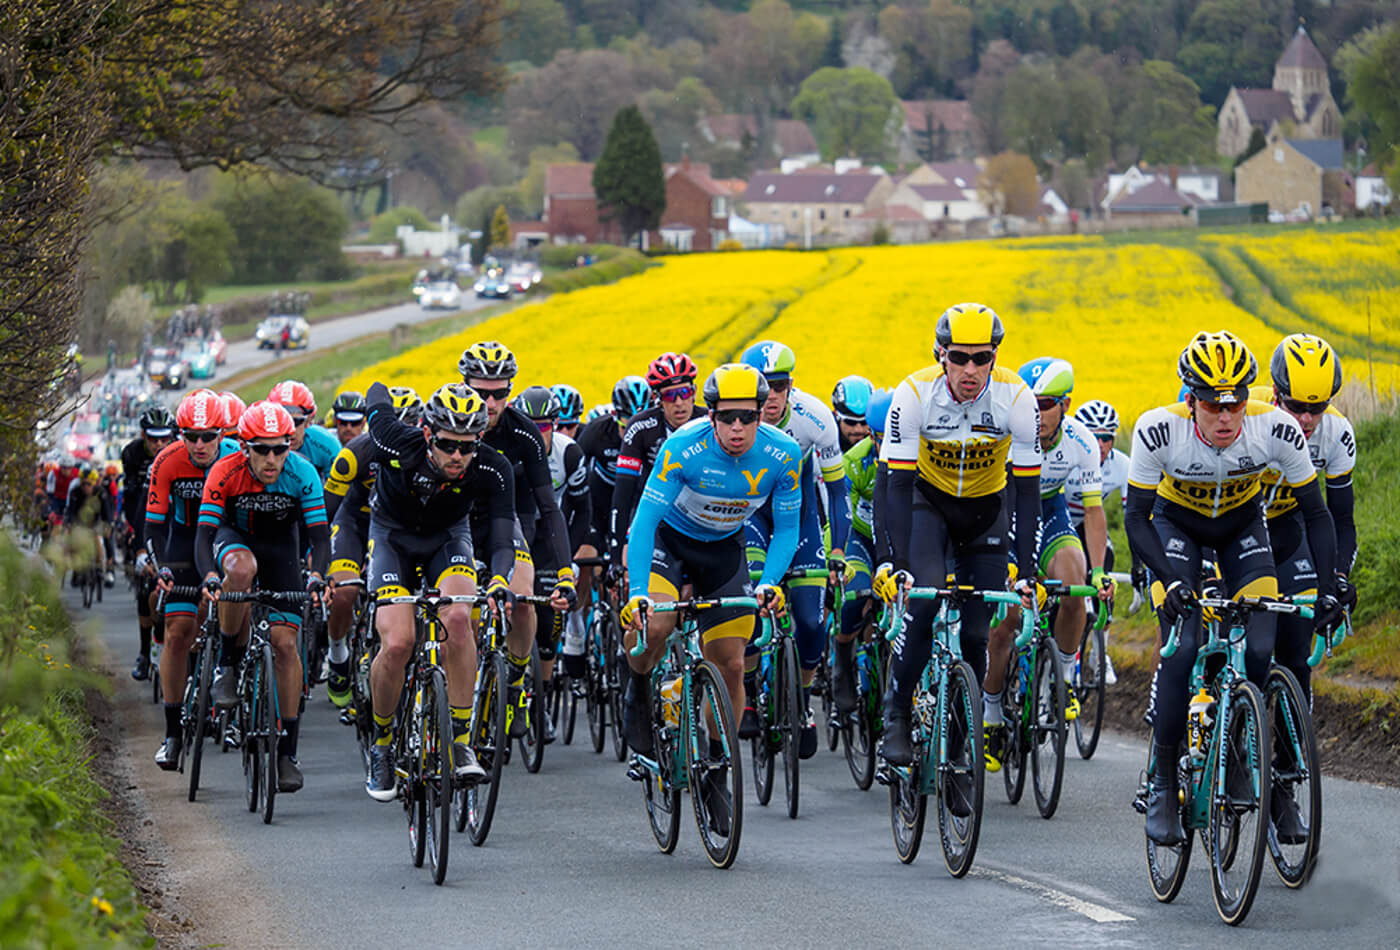 is there a tour de yorkshire this year